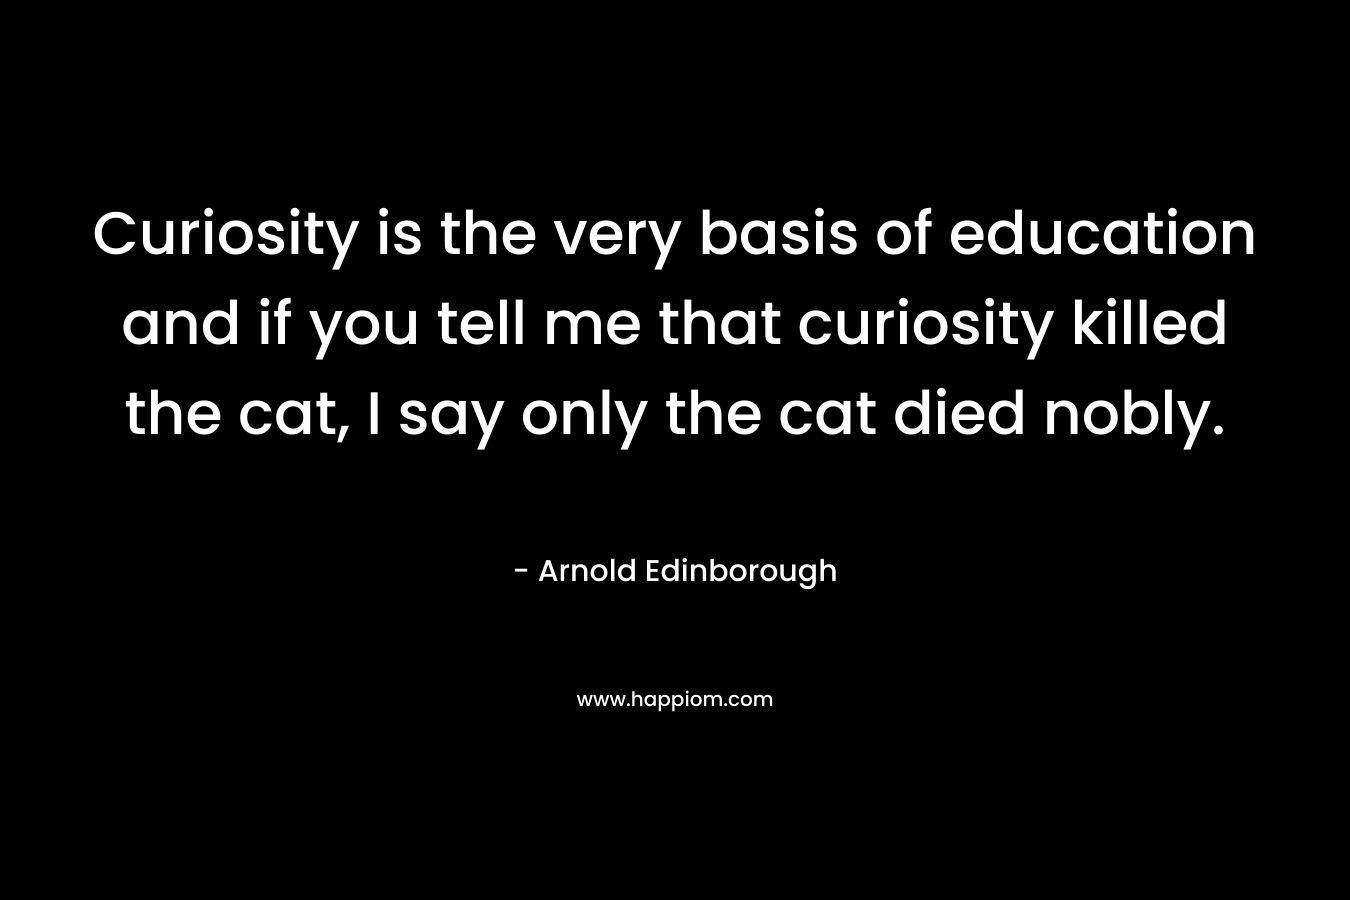 Curiosity is the very basis of education and if you tell me that curiosity killed the cat, I say only the cat died nobly.  – Arnold Edinborough